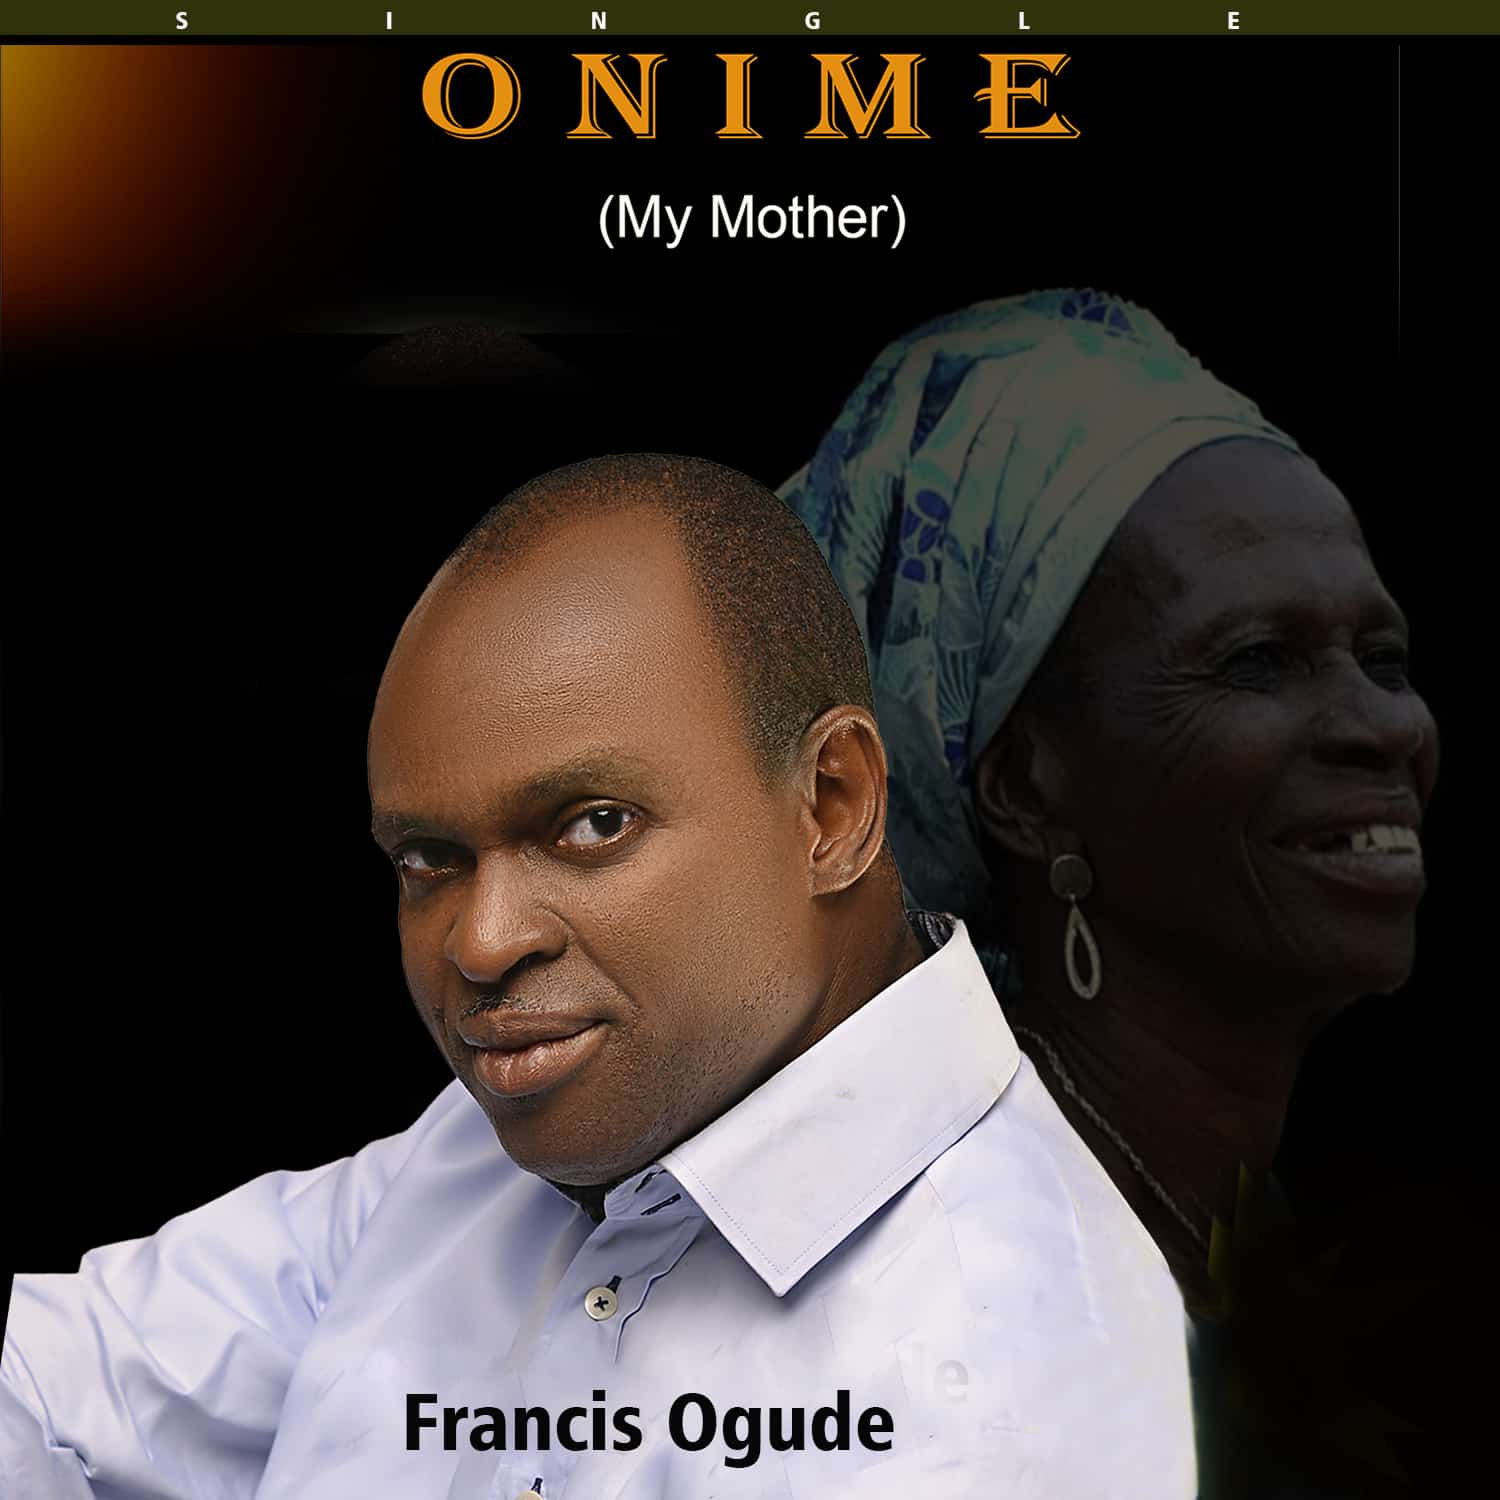 Download Mp3: Francis Ogude - Onime (My Mother)